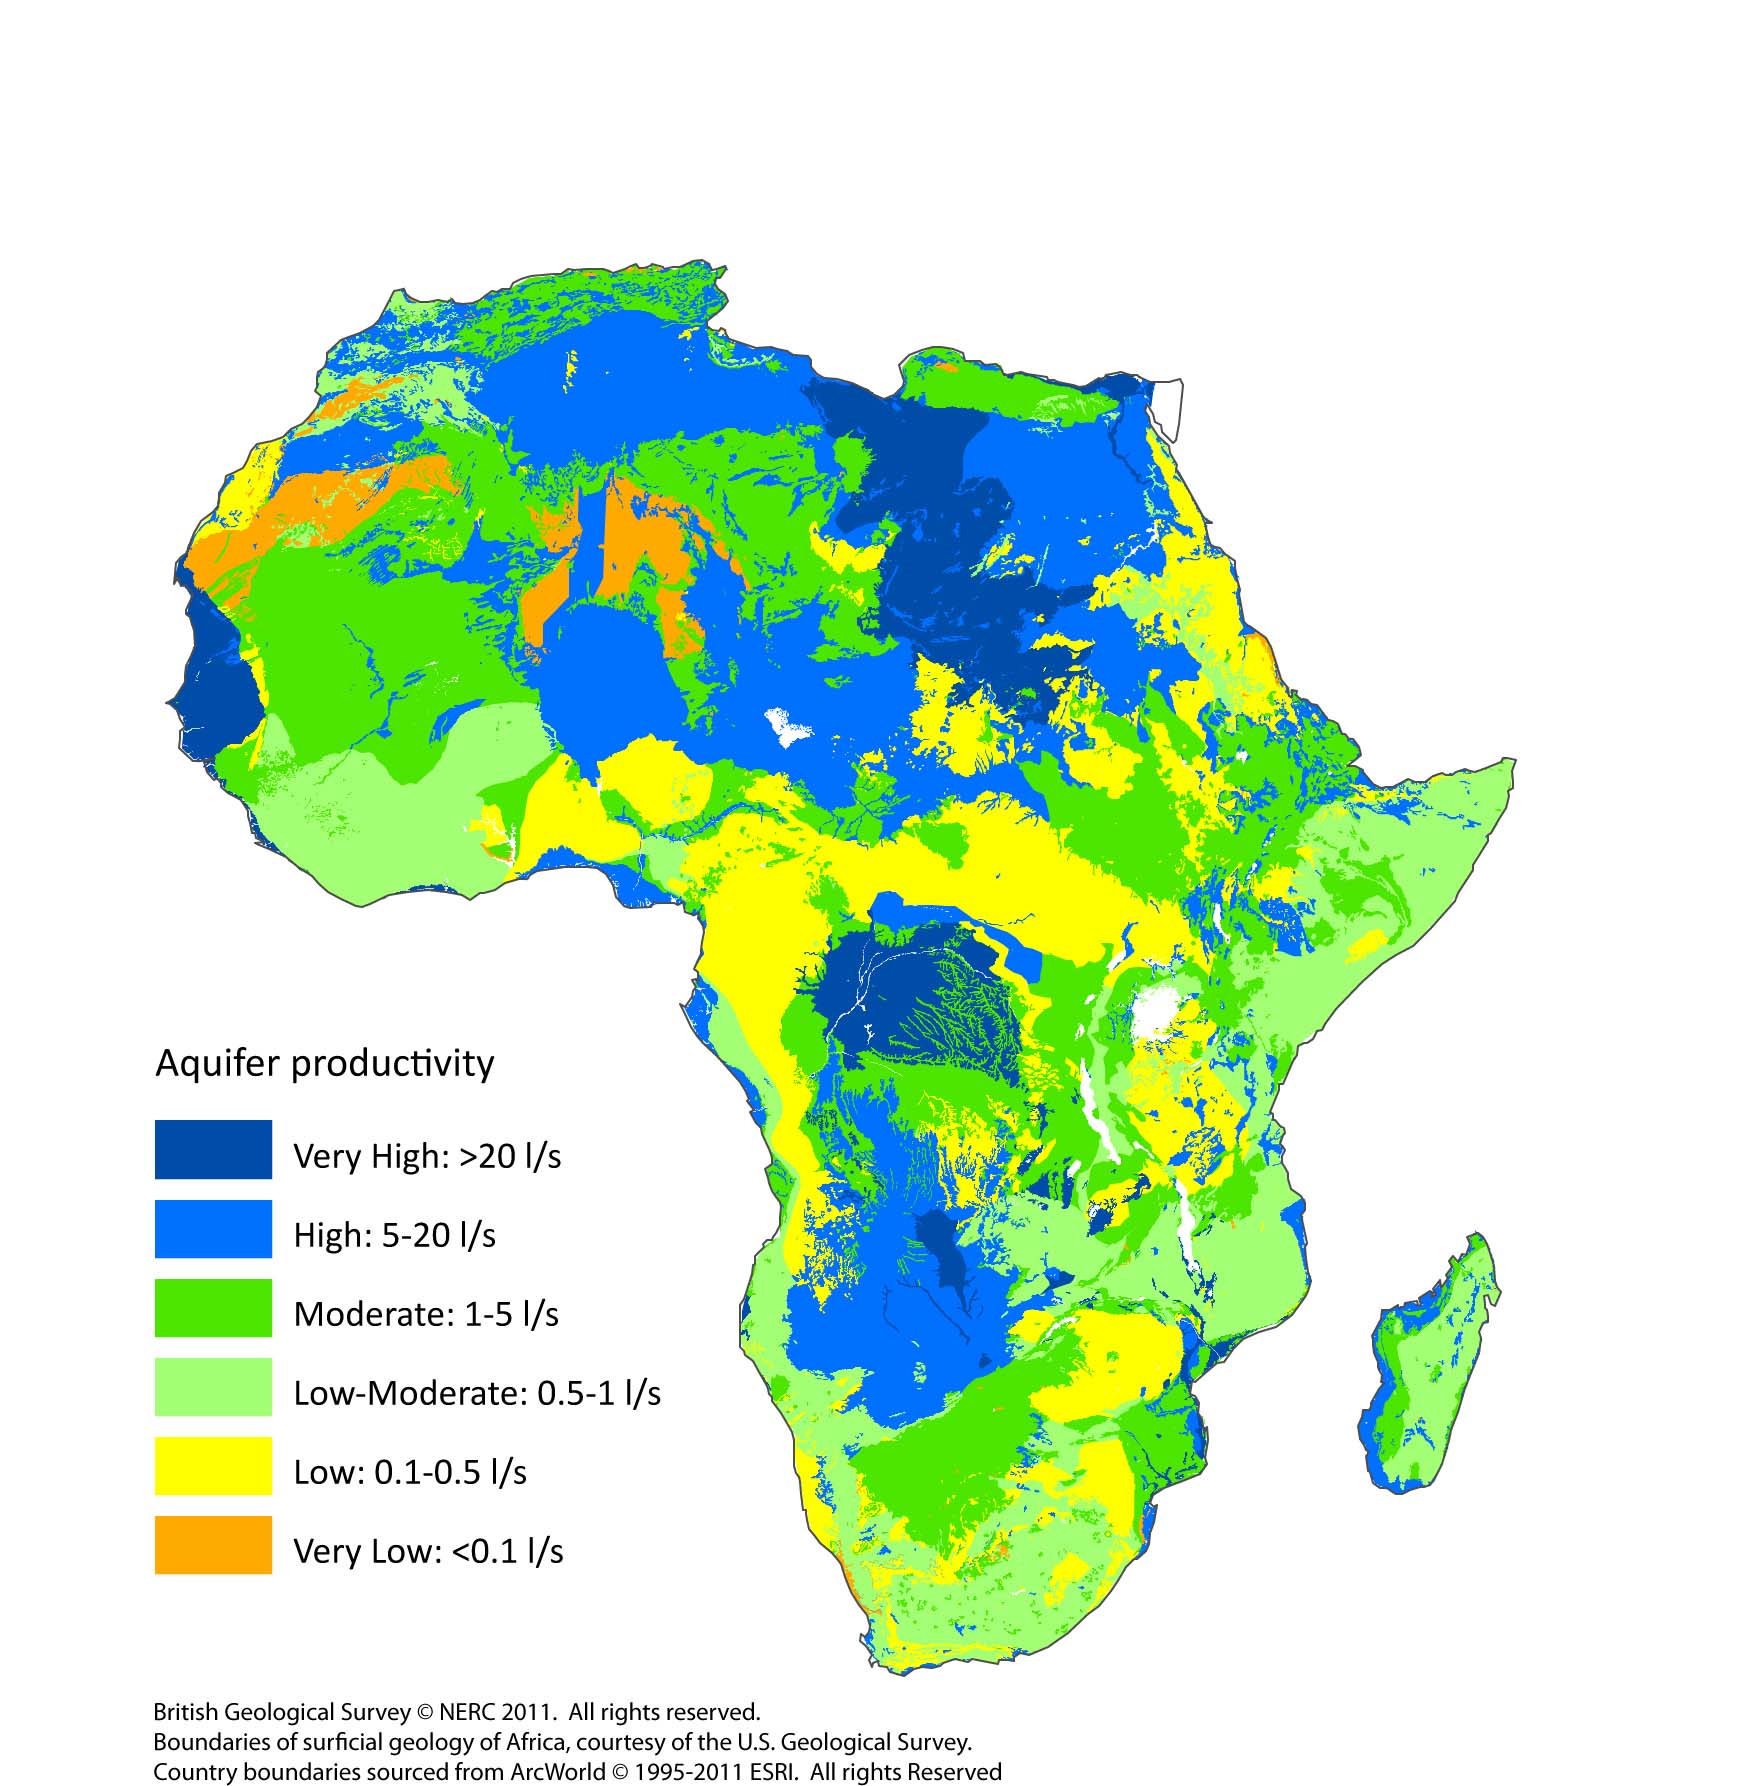 Groundwater productivity map of Africa.